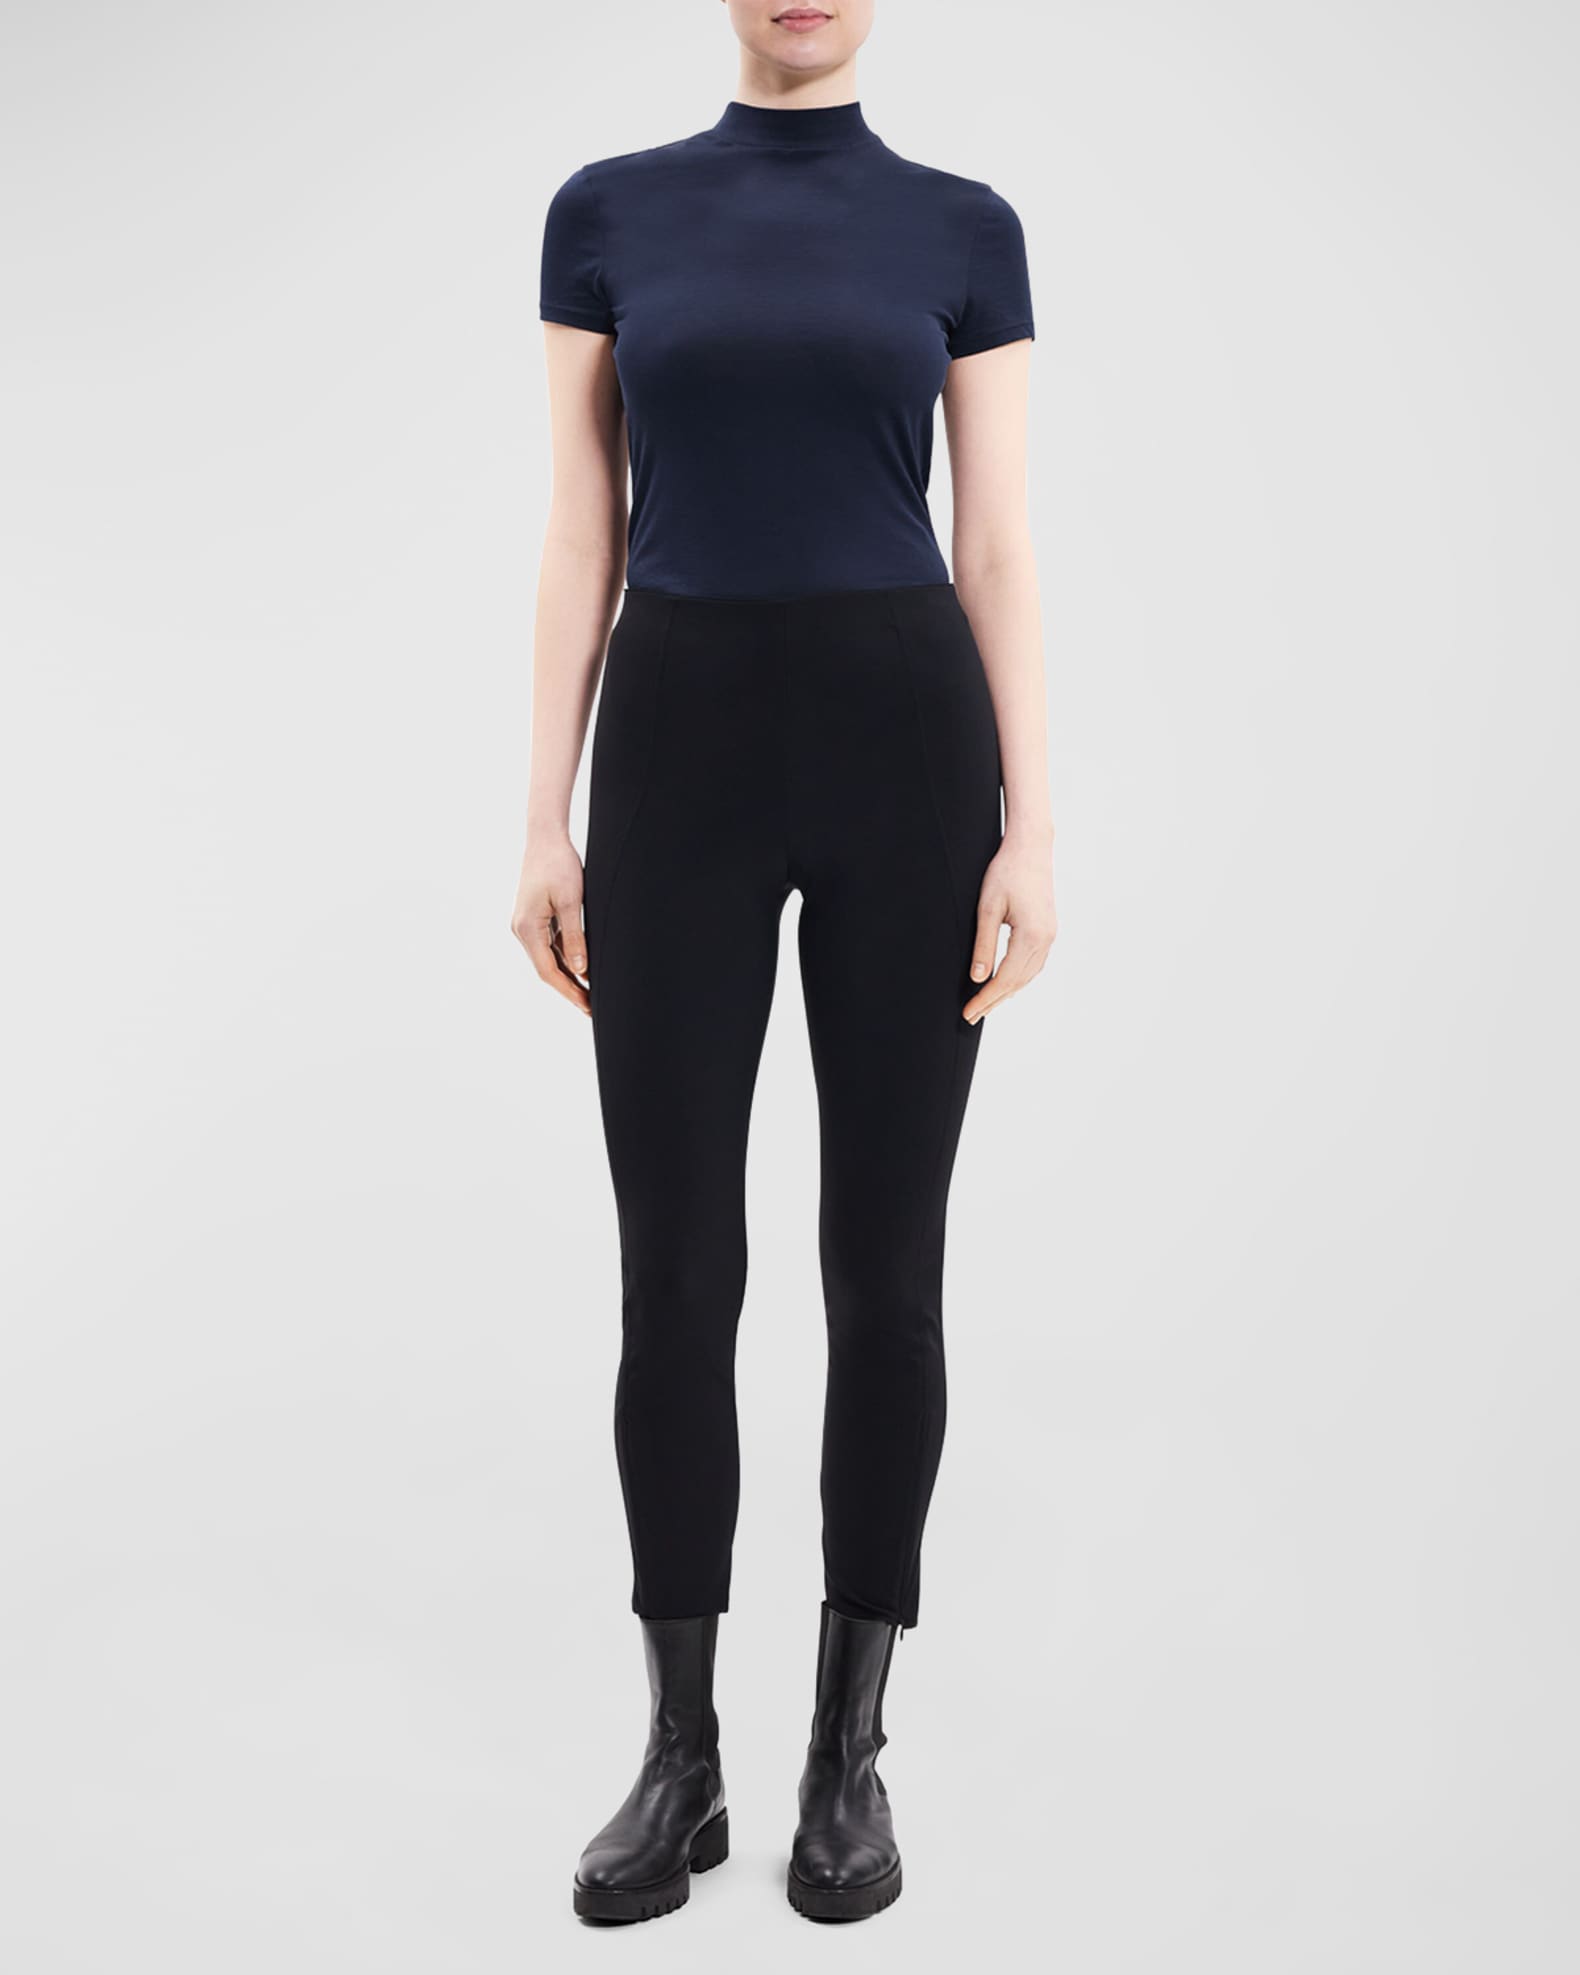 New Theory Black Seamed Leggings. Precision Ponte Ankle Zip Size